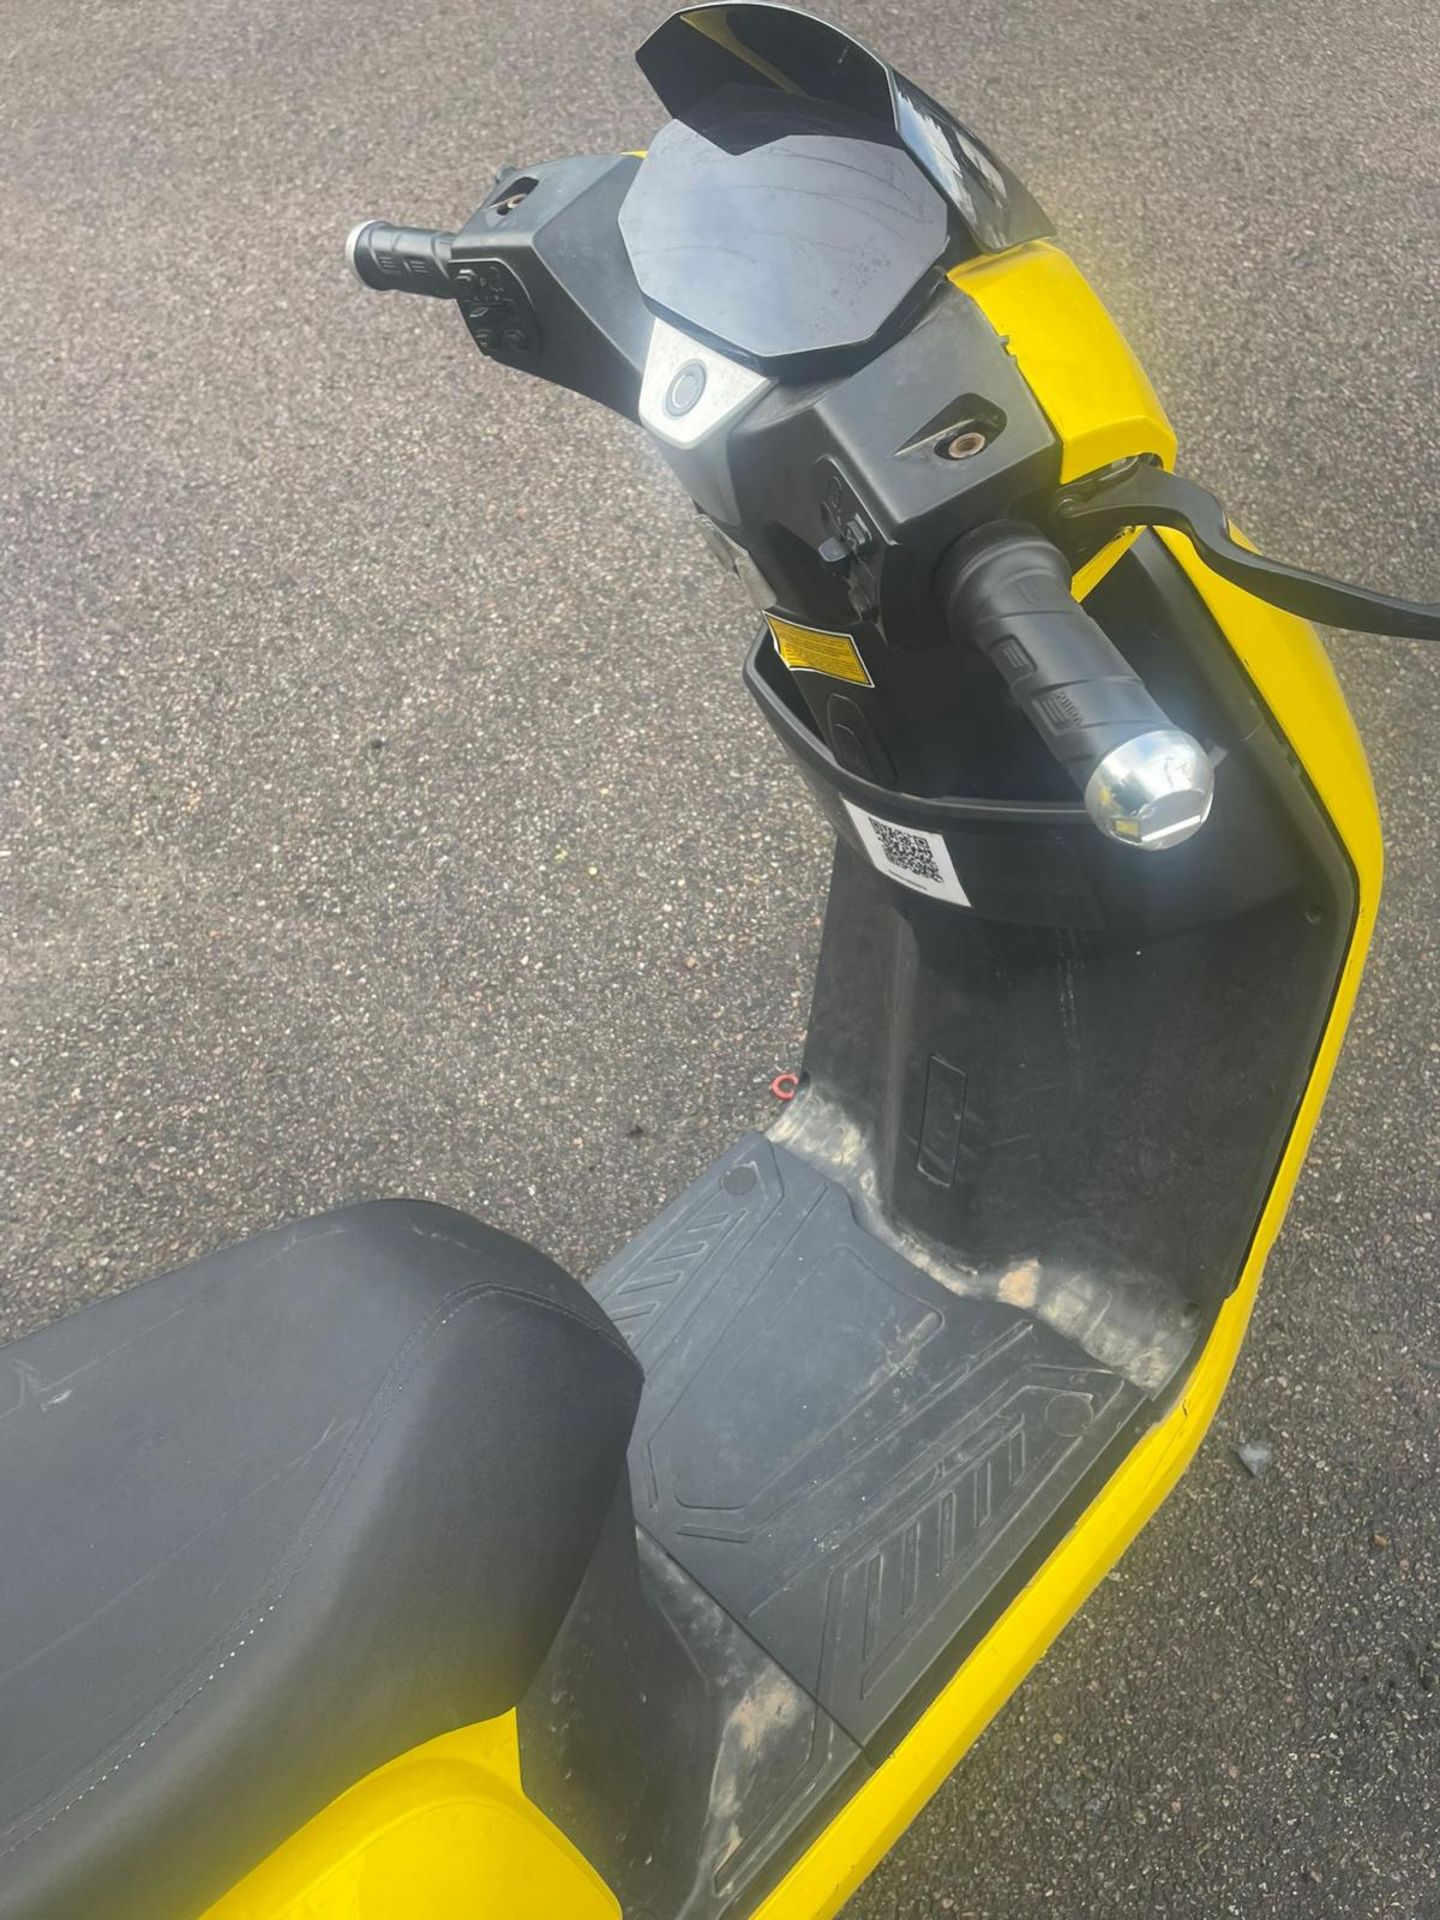 10 x Niu GTS & Sunra Robo S Electric Moped Scooters With Logbooks, Keys & Spares - Image 48 of 61